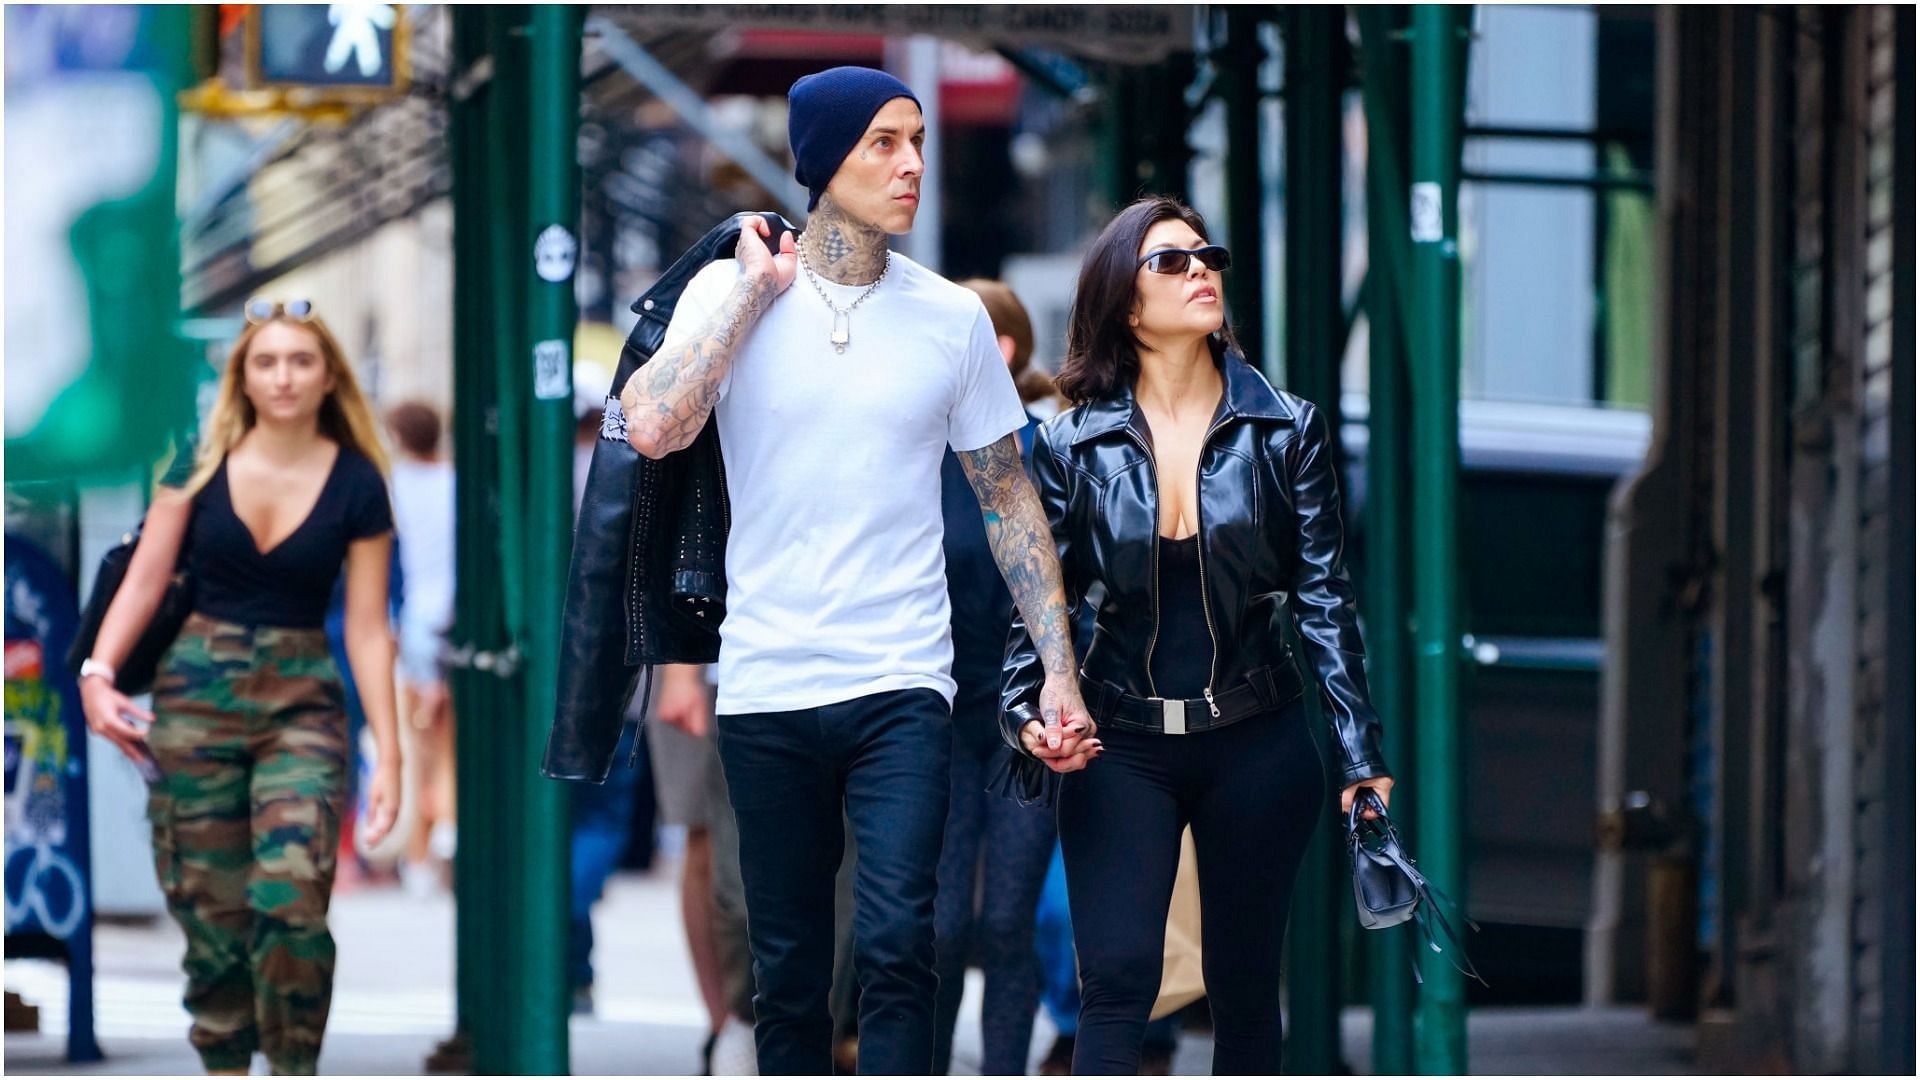 Kourtney Kardashian and Travis Barker are seen on October 16, 2021 in New York City (Image via Getty Images)